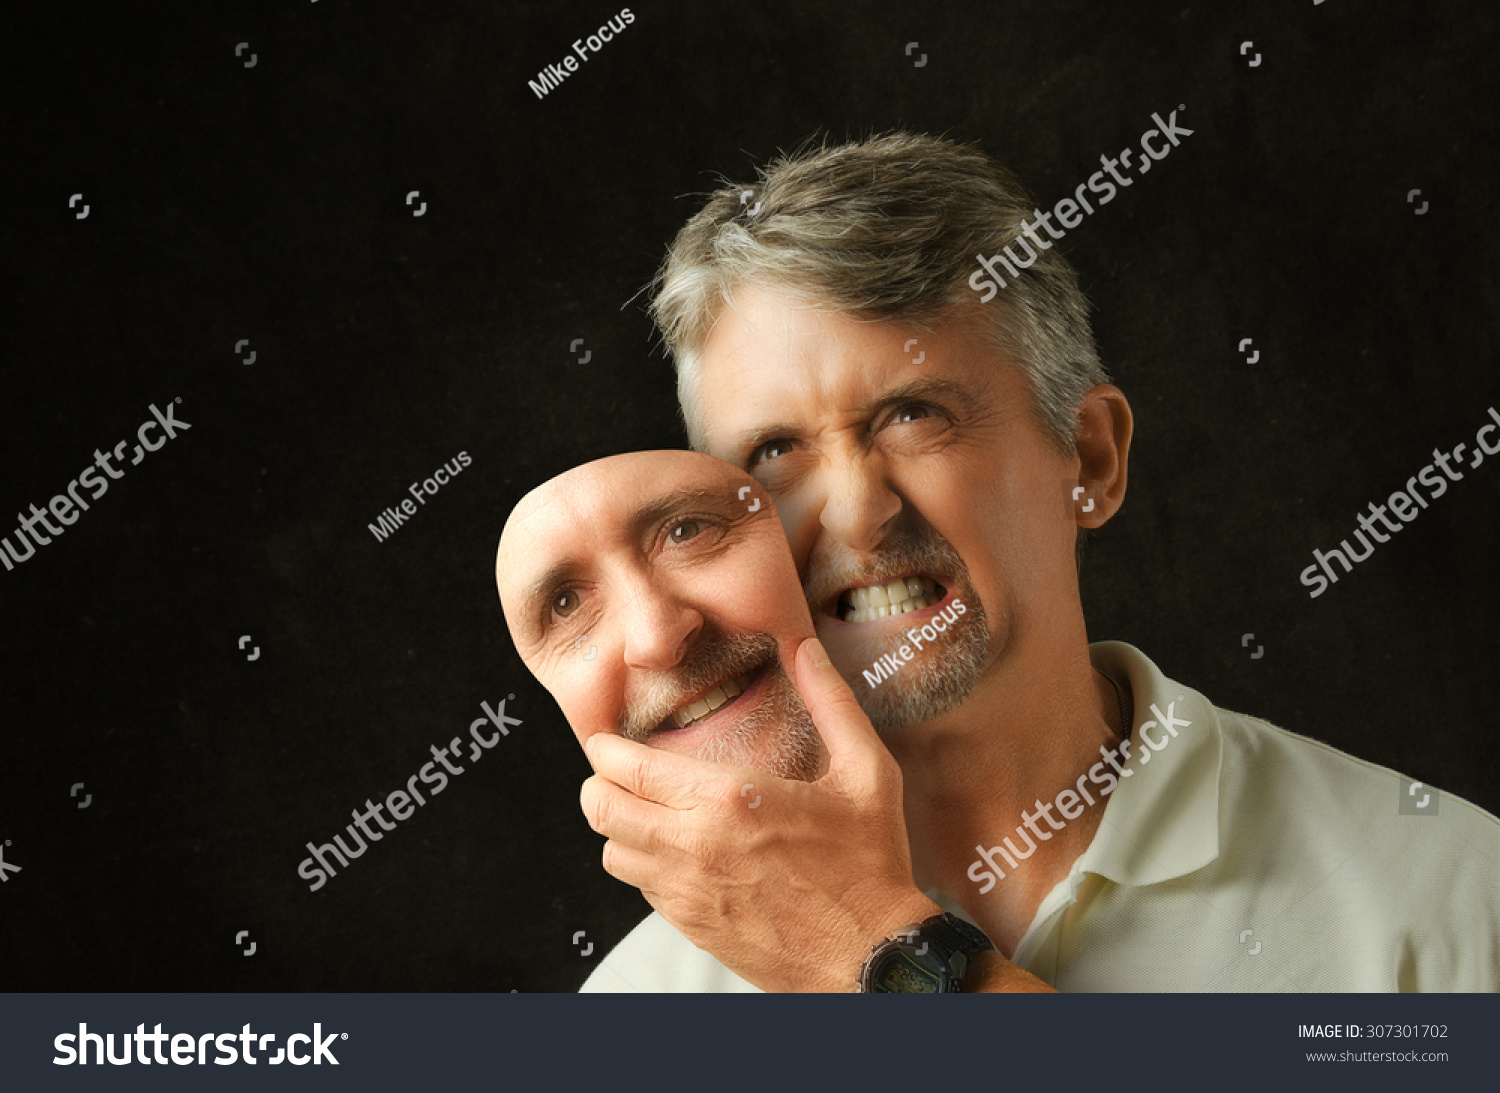 An angry, emotional, depressed, bipolar disorder man is revealing his true self as he takes off a fake smile happiness mask that looks exactly like his face.  #307301702